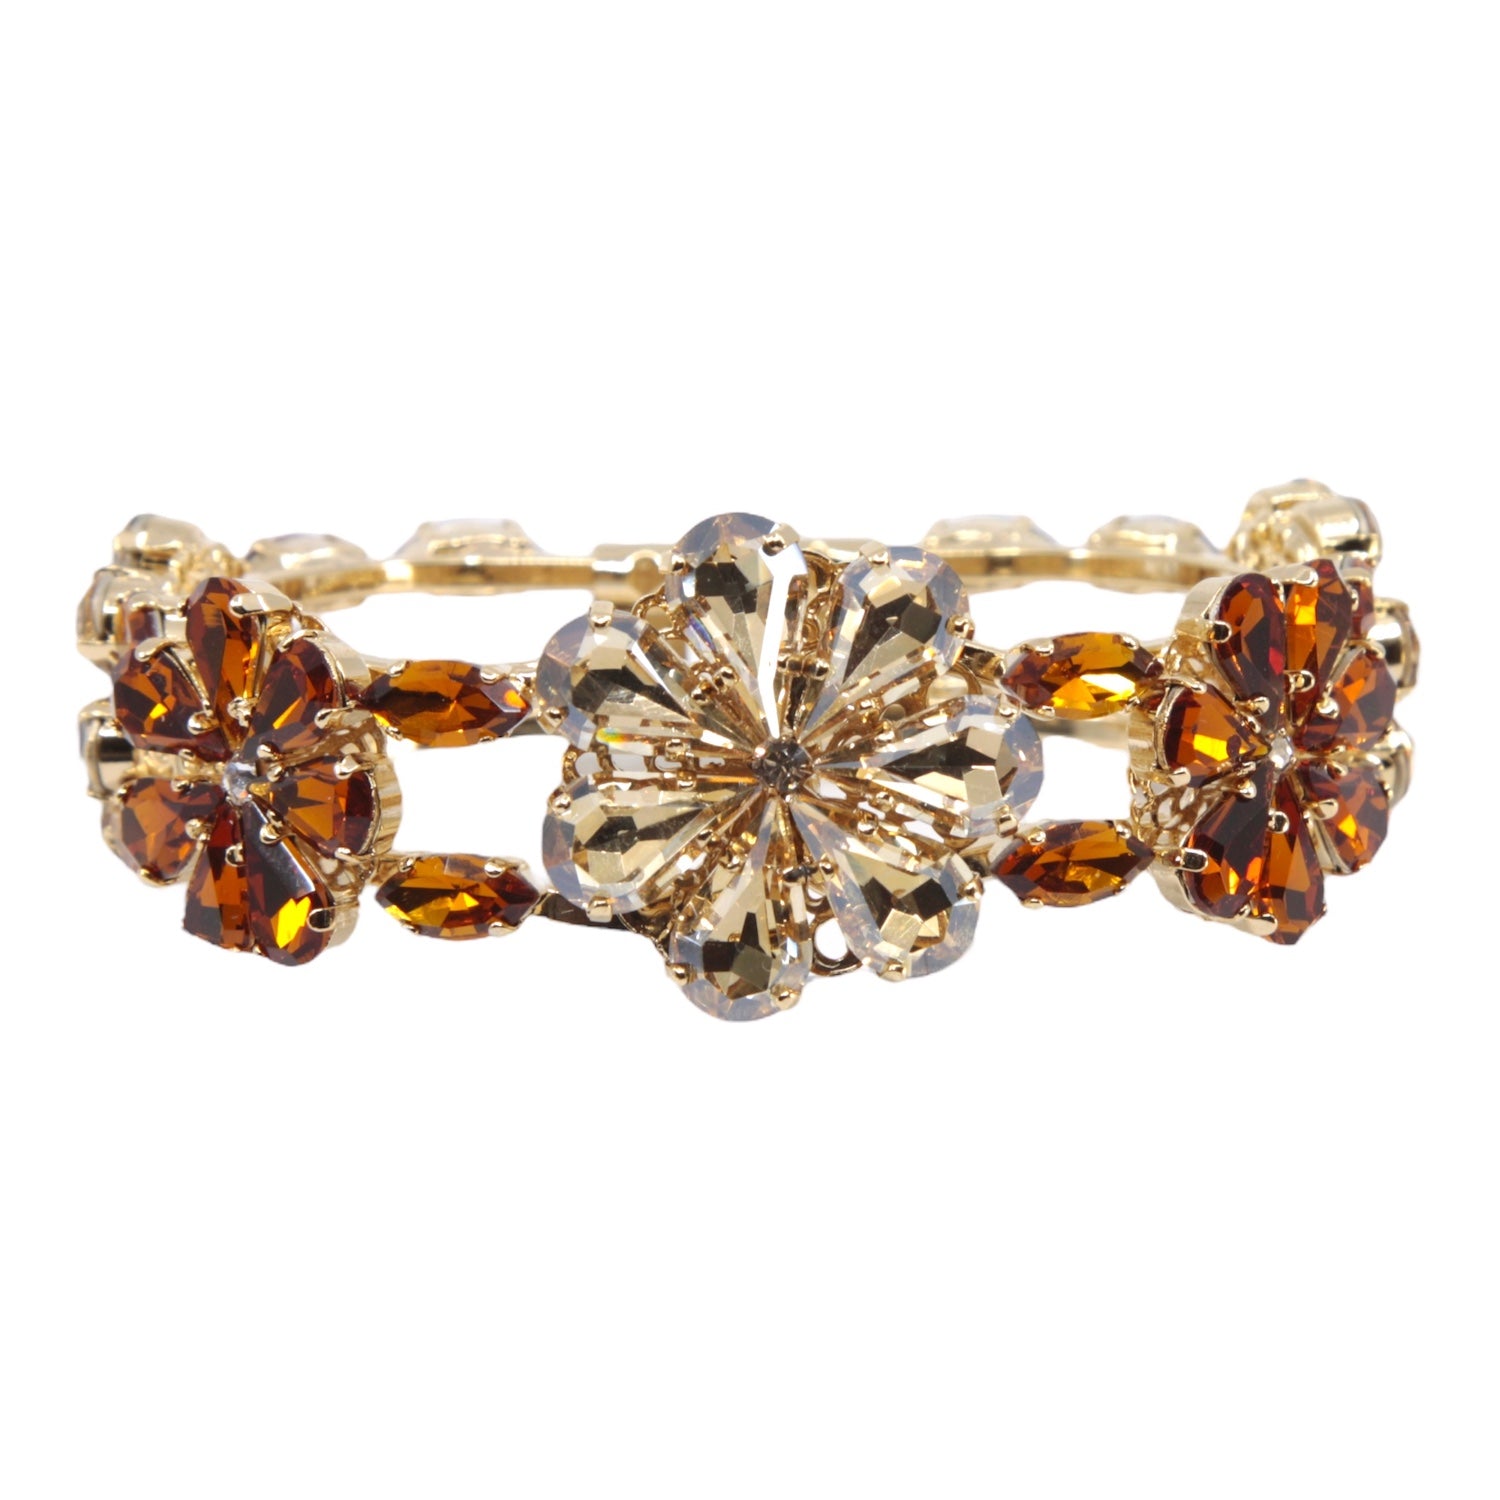 Daisy Bracelet In Amber And Topaz Shades